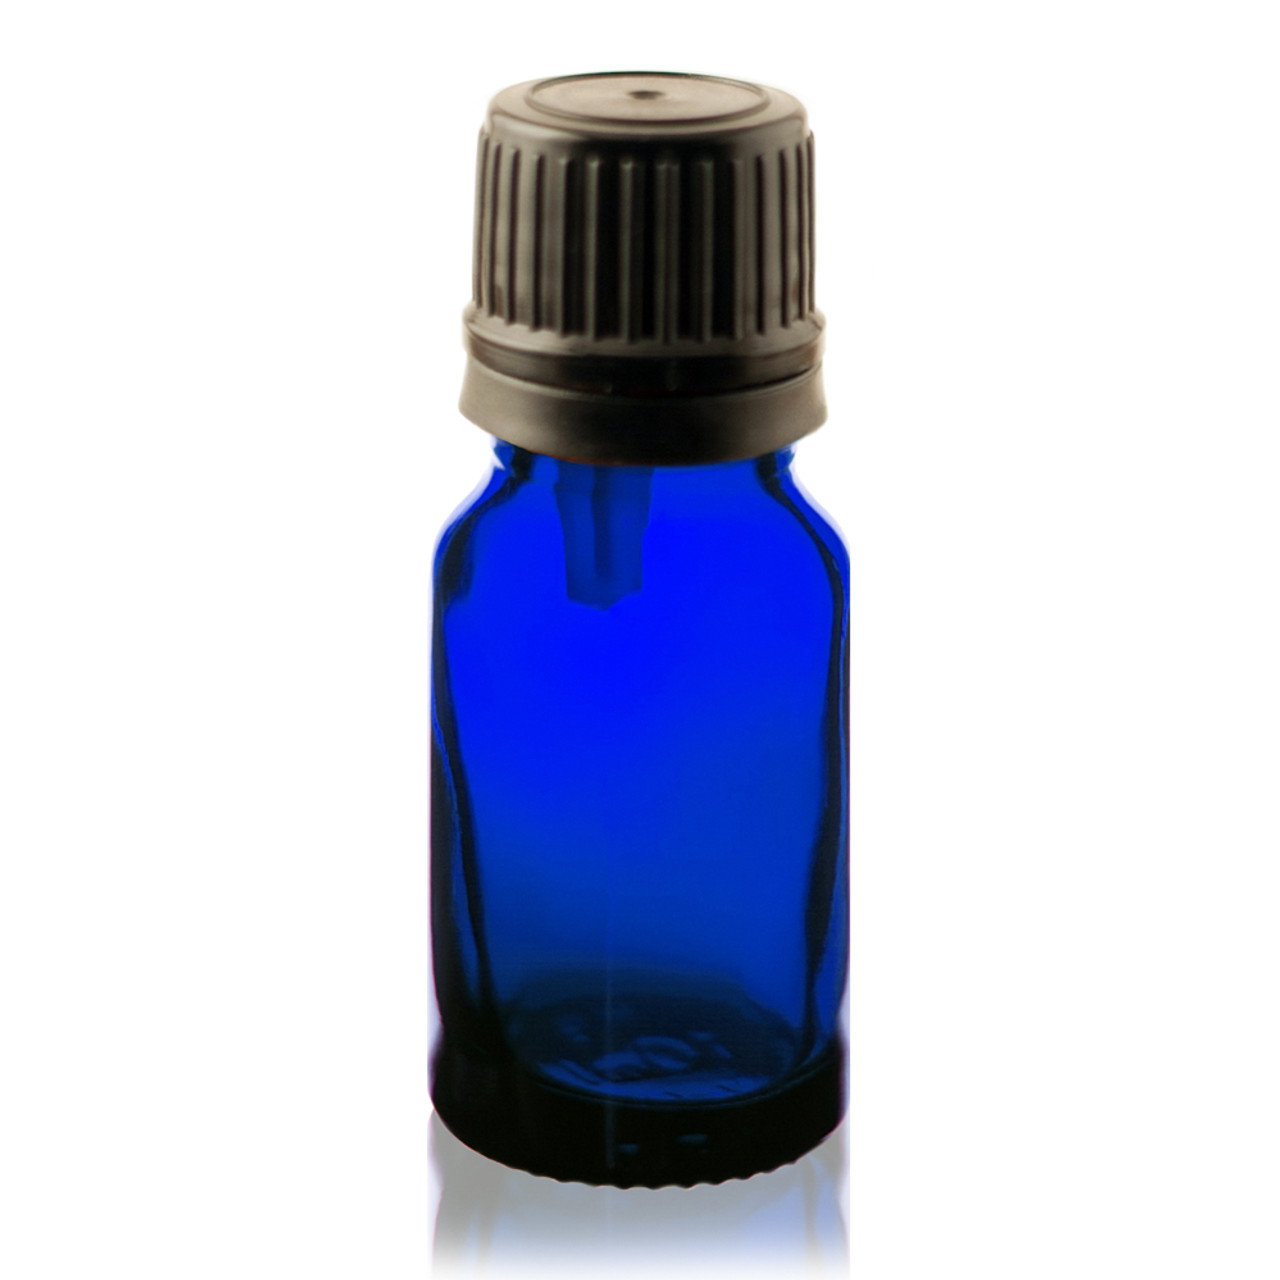 Download 15 ml Cobalt BLUE Euro Dropper Bottles with Black Cap and Inserts